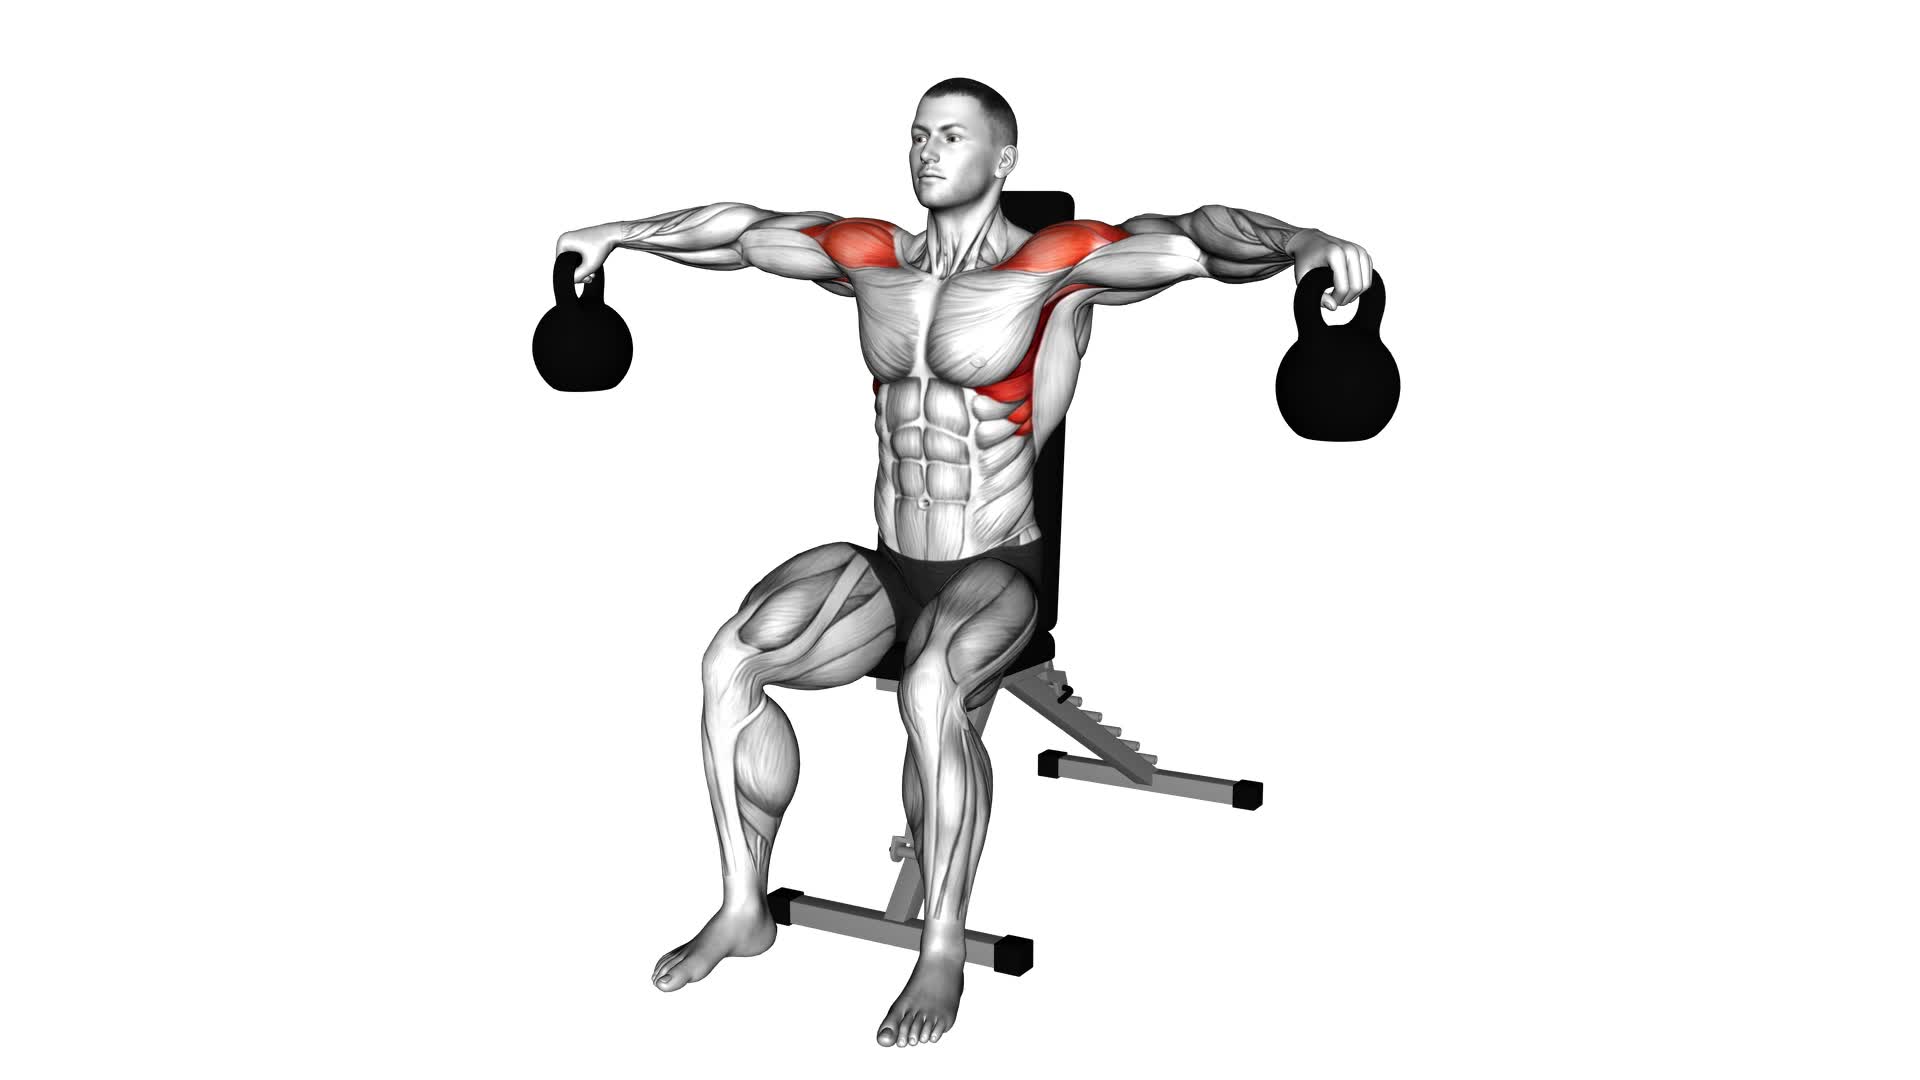 Kettlebell Seated Lateral Raise - Video Exercise Guide & Tips